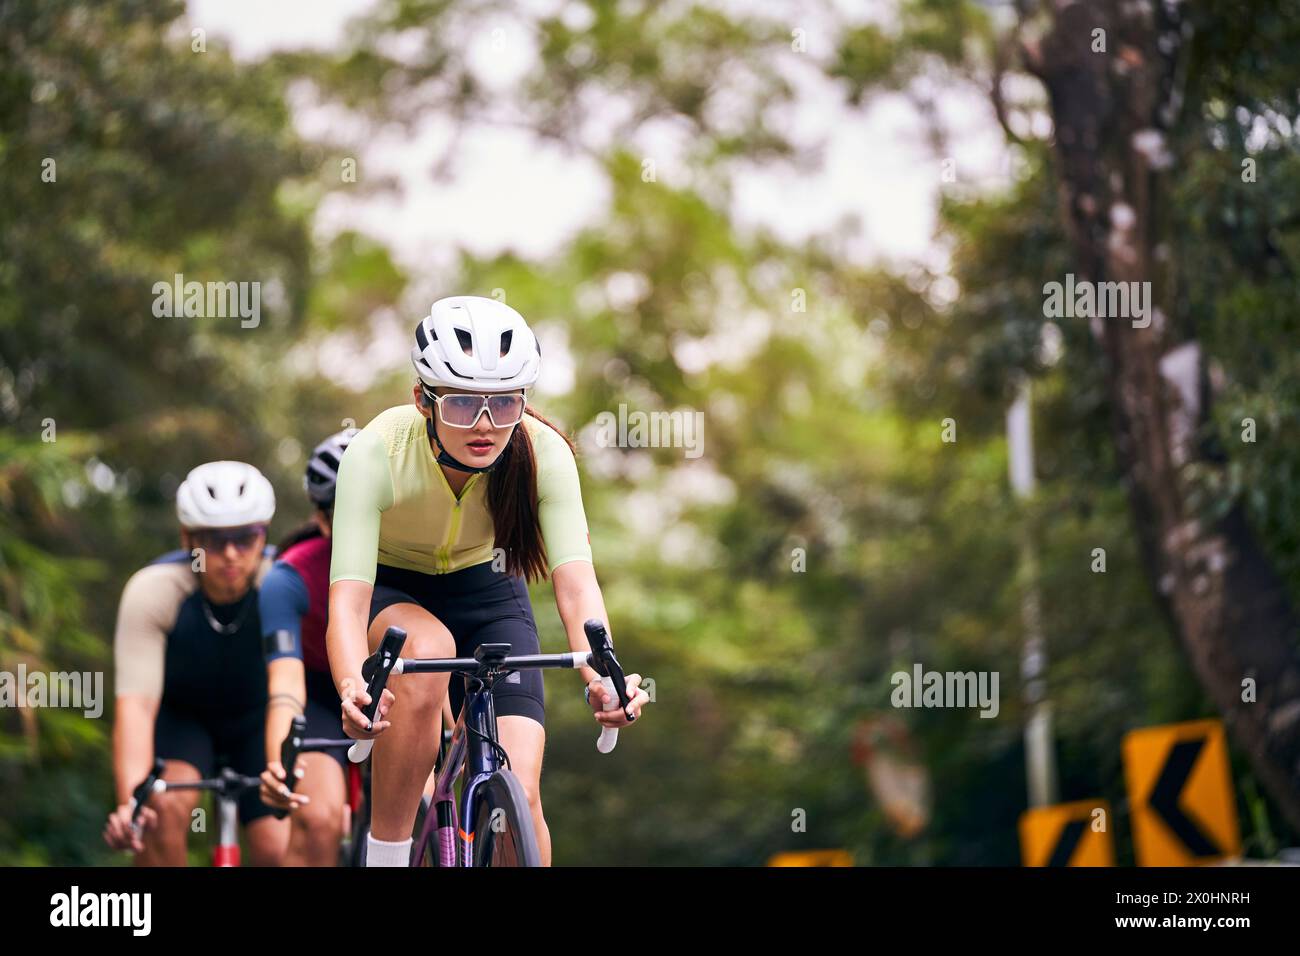 group of three young asian adult cyclists riding bike on rural road Stock Photo